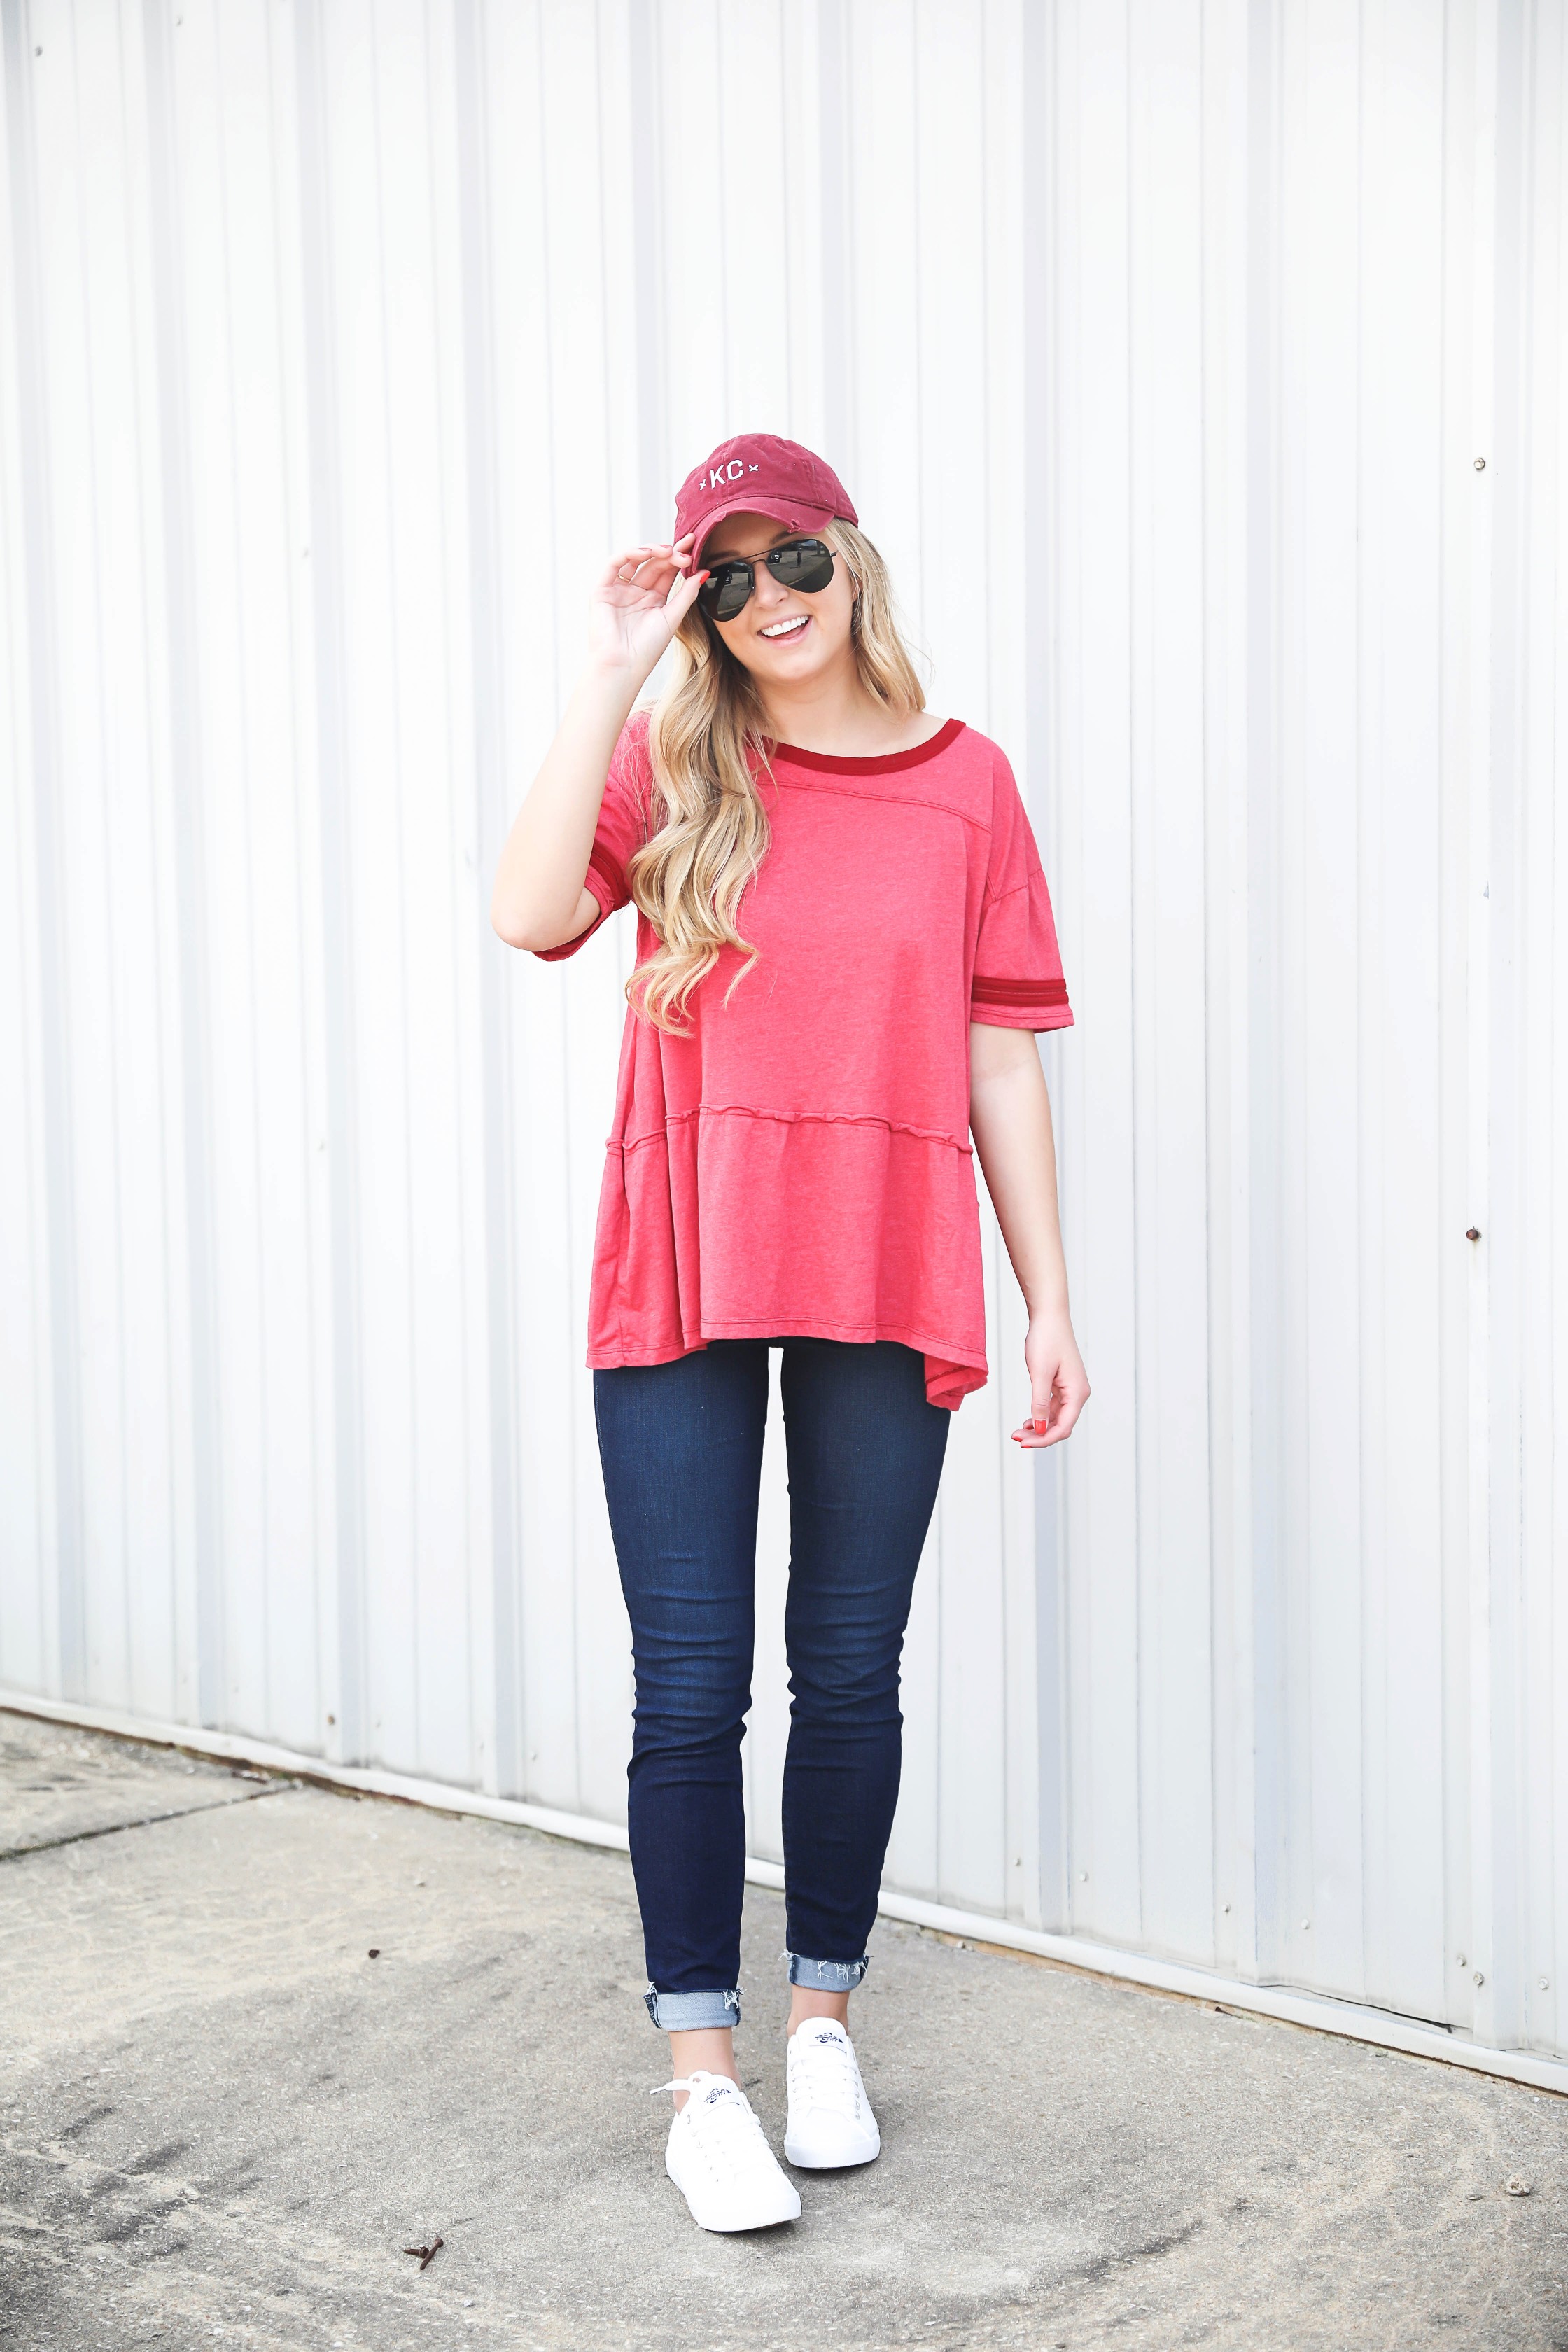 Kansas City outfit ideas! Cute KC top, this casual red top is perfect for chiefs games this fall! I am also sharing this cute outfit for Royals Games! This sequin KC royals shirt is so cute! Details on fashion blog daily dose of charm by lauren lindmark